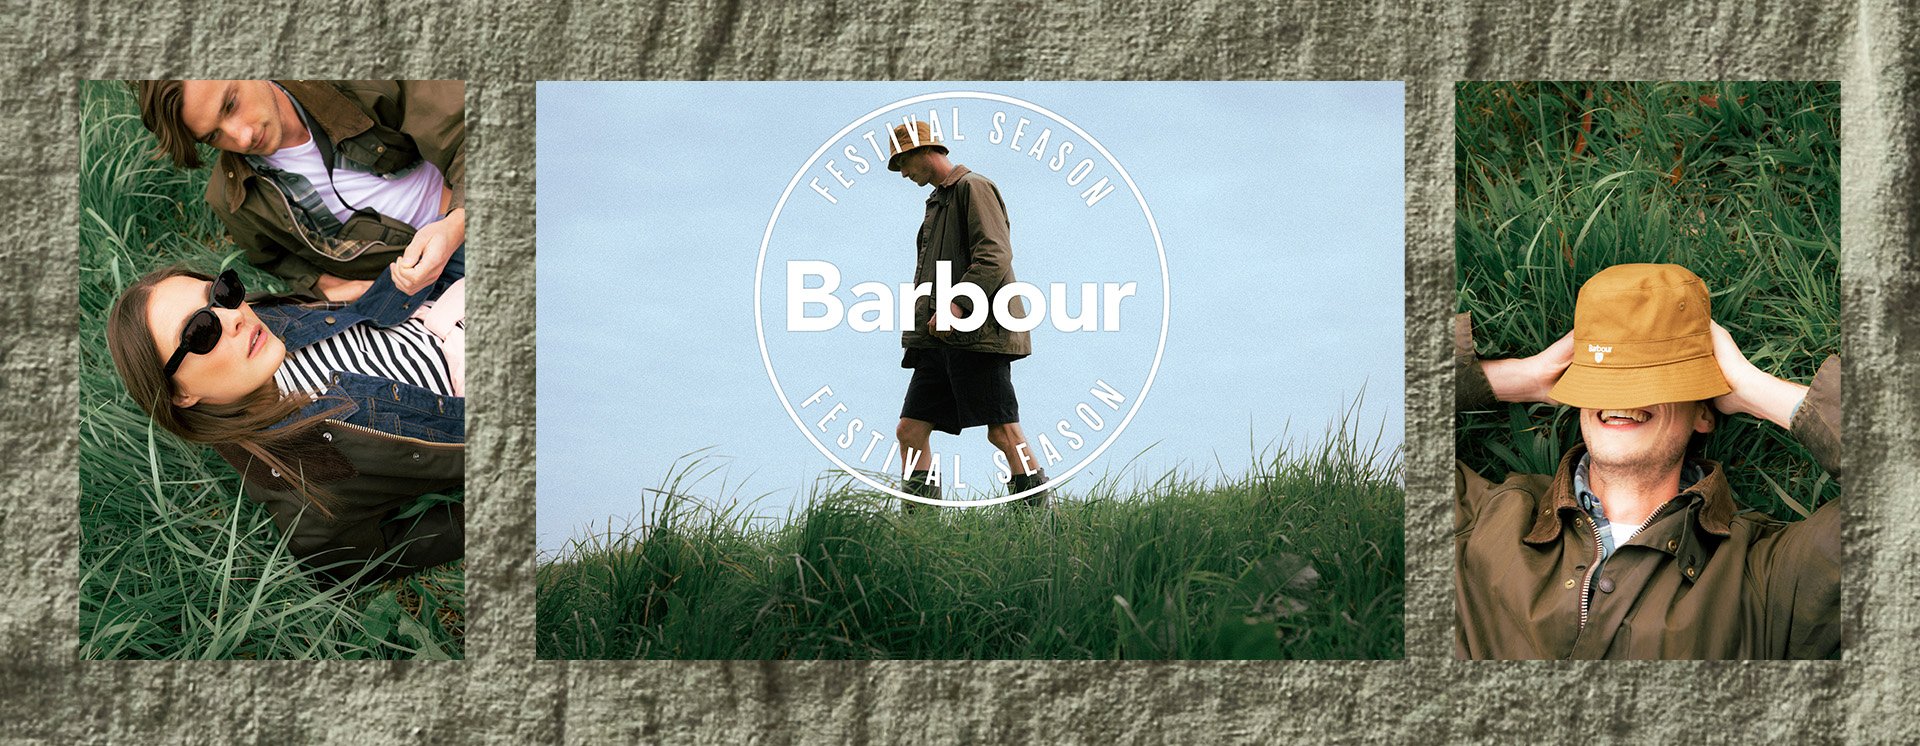 Models wearing clothing from the Barbour Festival Shop